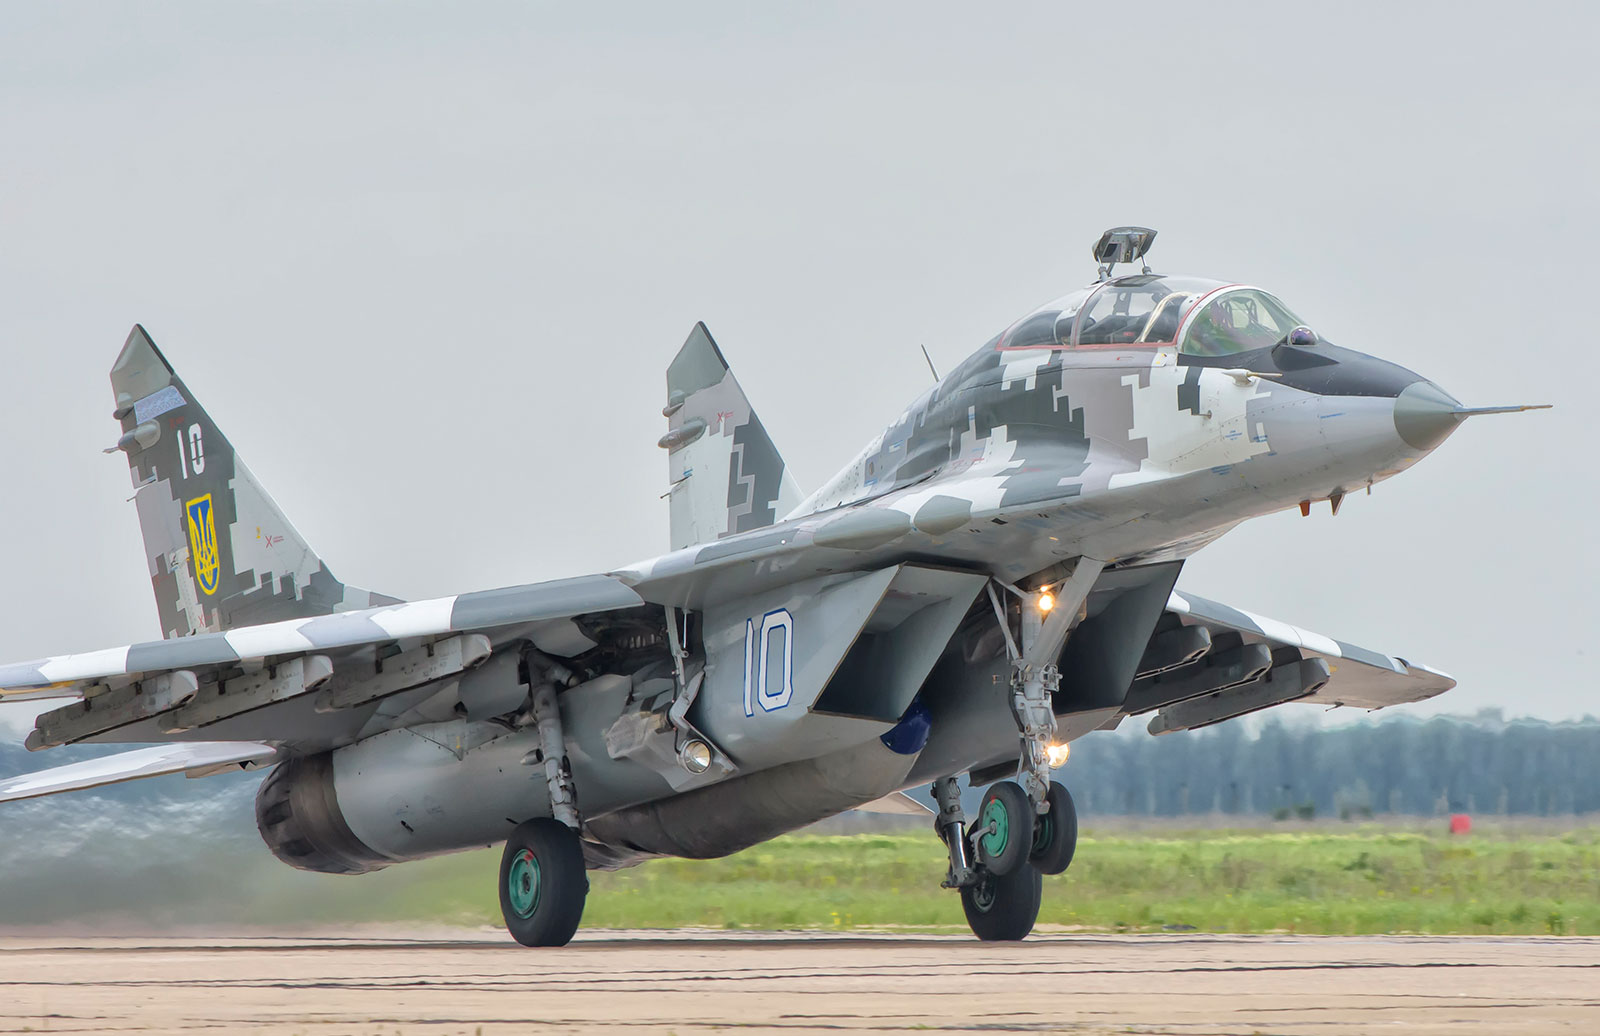 A Ukrainian Air Force Mig-29 takes off from Mykolaiv airbase for a training mission in Ukraine in 2016. Ukraine's President Volodymyr Zelensky has repeatedly asked other countries for Mig-29 Fulcrum fighter jets from the Soviet era, which Ukrainian pilots already know how to fly.  . 